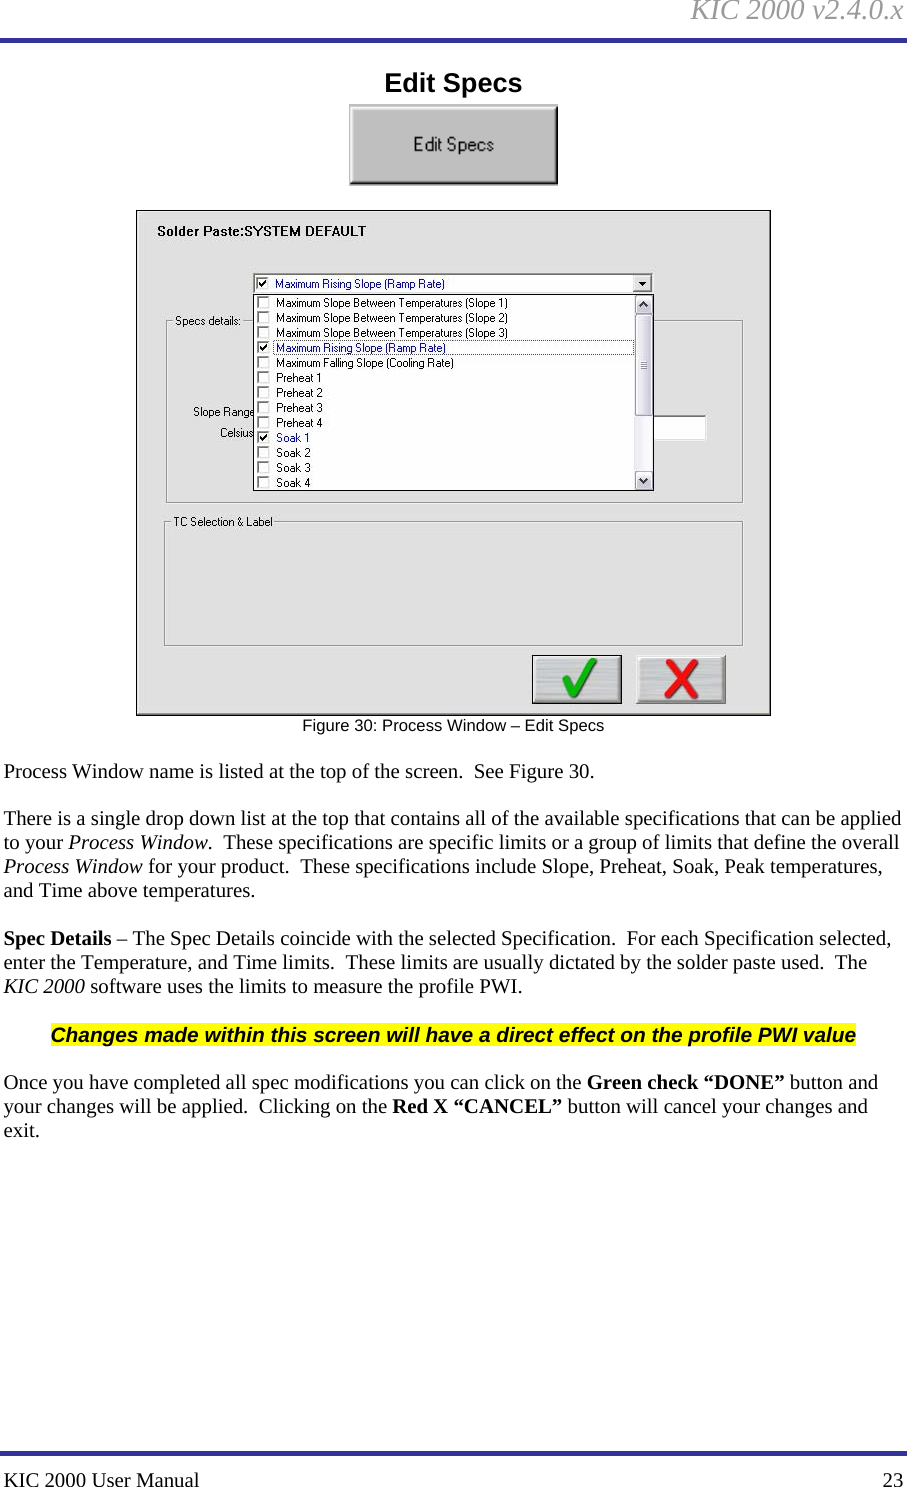 KIC 2000 v2.4.0.x KIC 2000 User Manual    23 Edit Specs    Figure 30: Process Window – Edit Specs  Process Window name is listed at the top of the screen.  See Figure 30.    There is a single drop down list at the top that contains all of the available specifications that can be applied to your Process Window.  These specifications are specific limits or a group of limits that define the overall Process Window for your product.  These specifications include Slope, Preheat, Soak, Peak temperatures, and Time above temperatures.  Spec Details – The Spec Details coincide with the selected Specification.  For each Specification selected, enter the Temperature, and Time limits.  These limits are usually dictated by the solder paste used.  The KIC 2000 software uses the limits to measure the profile PWI.  Changes made within this screen will have a direct effect on the profile PWI value  Once you have completed all spec modifications you can click on the Green check “DONE” button and your changes will be applied.  Clicking on the Red X “CANCEL” button will cancel your changes and exit.   